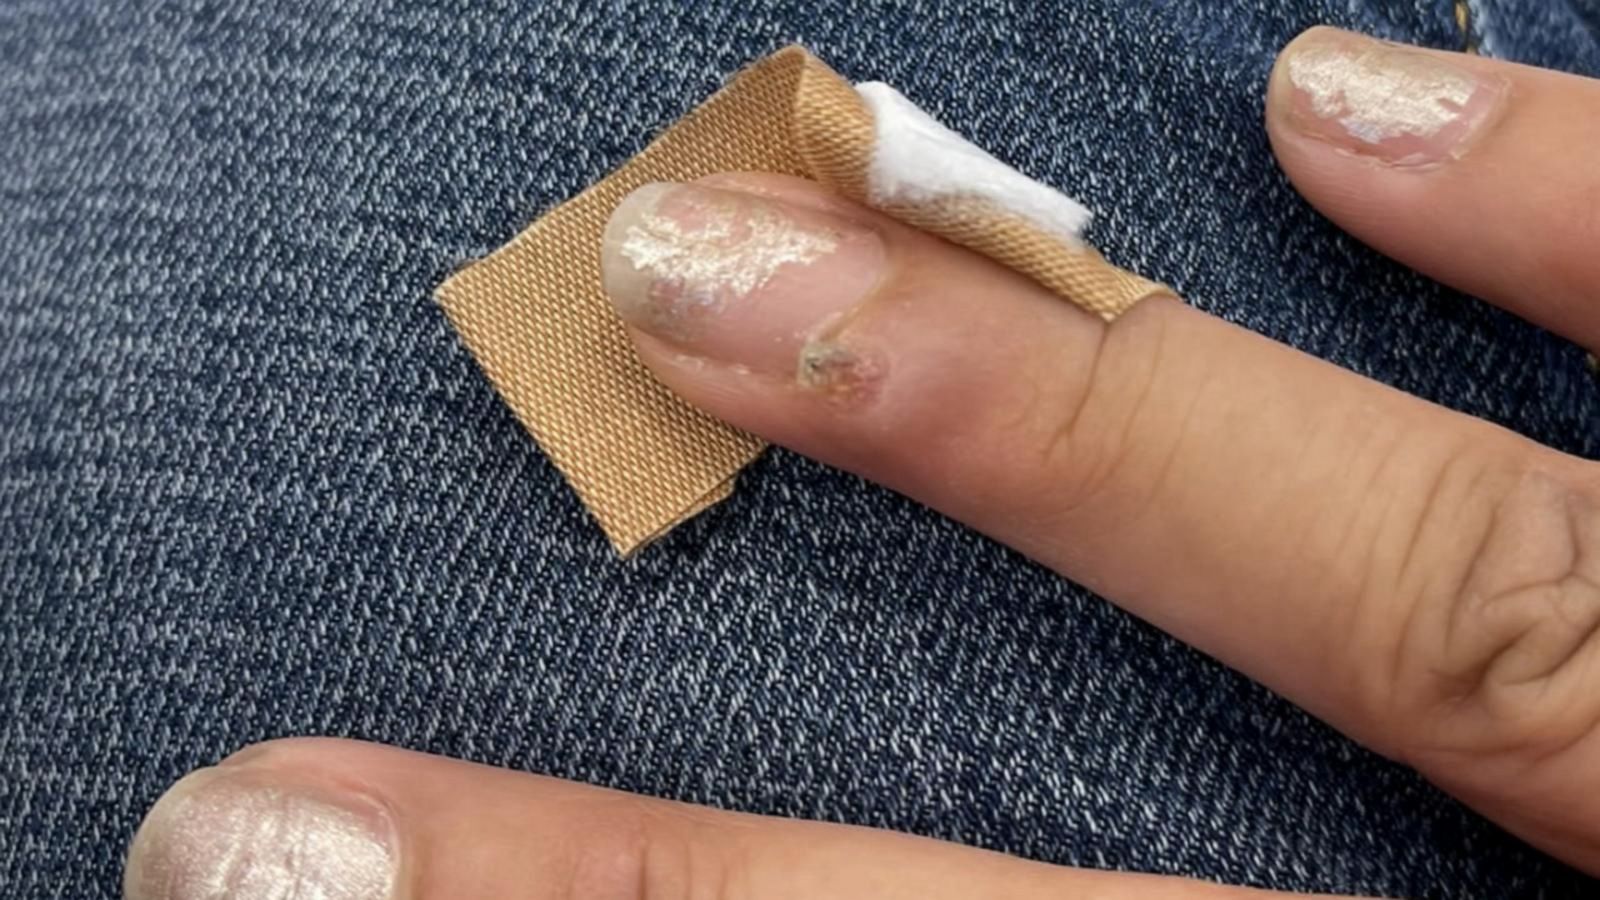 Woman claims she got HPV-related nail cancer after salon visit - Good  Morning America